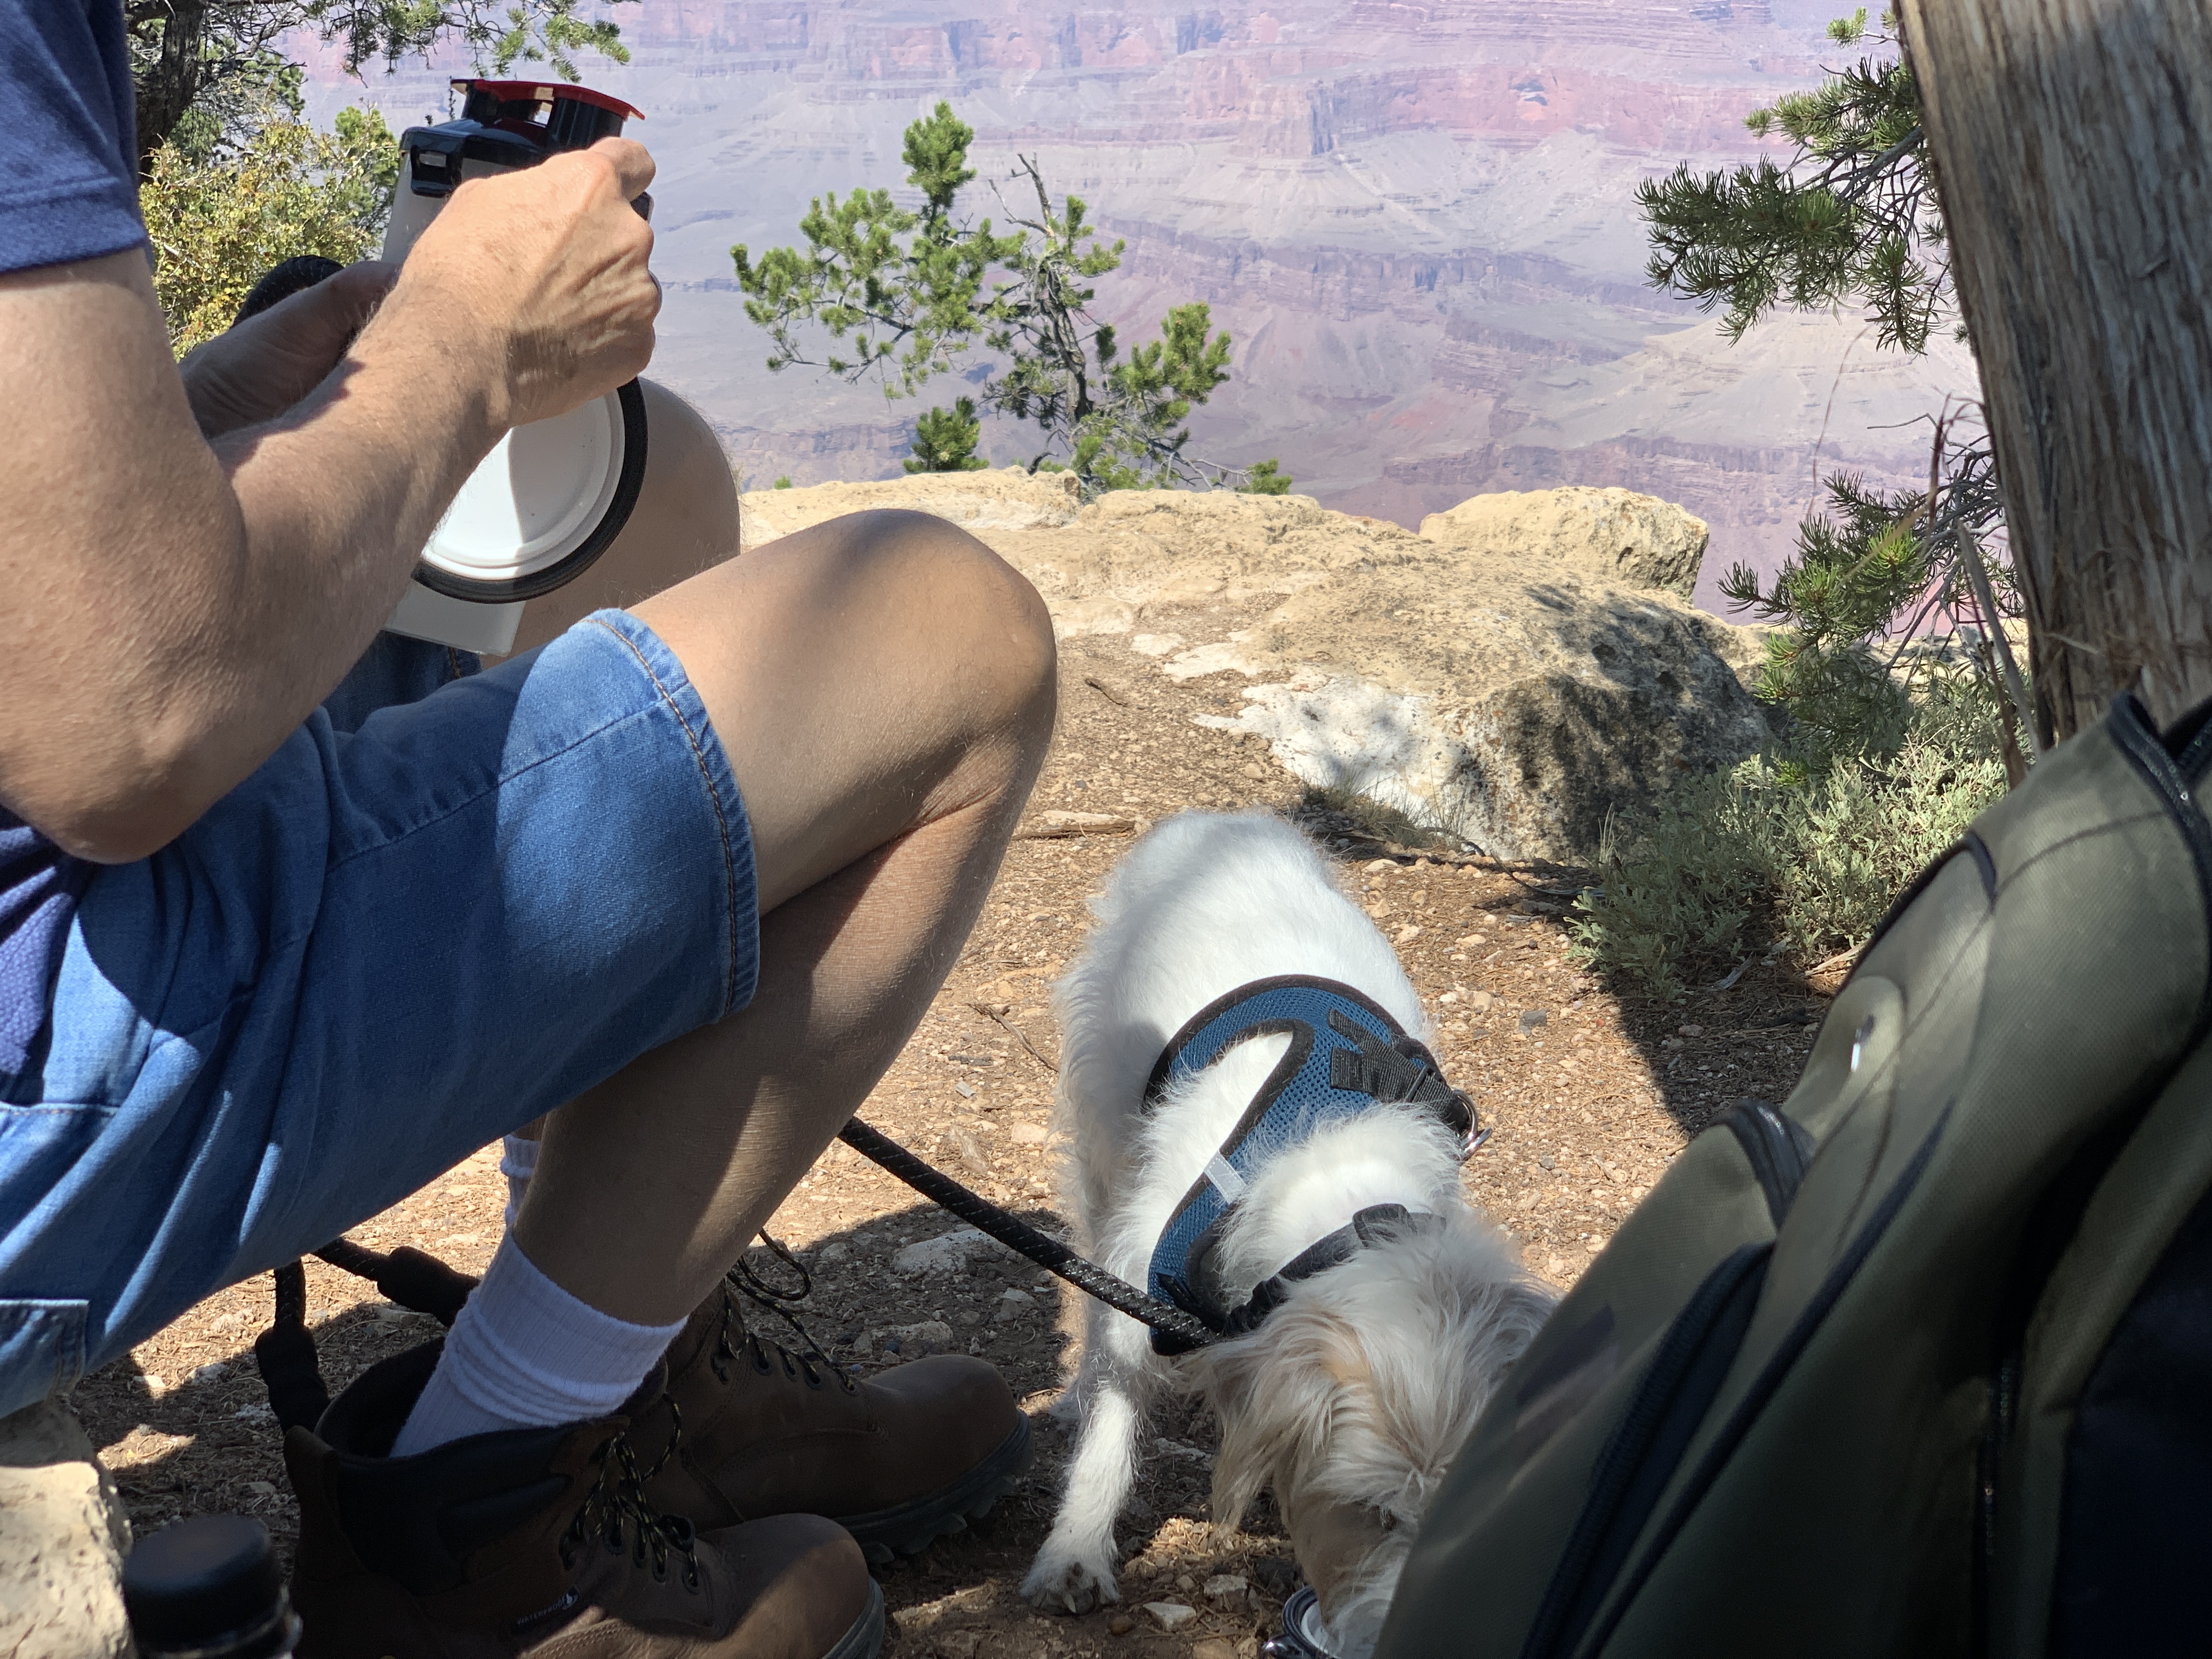 Breaking for a meal in the shade at Grand Canyon NP